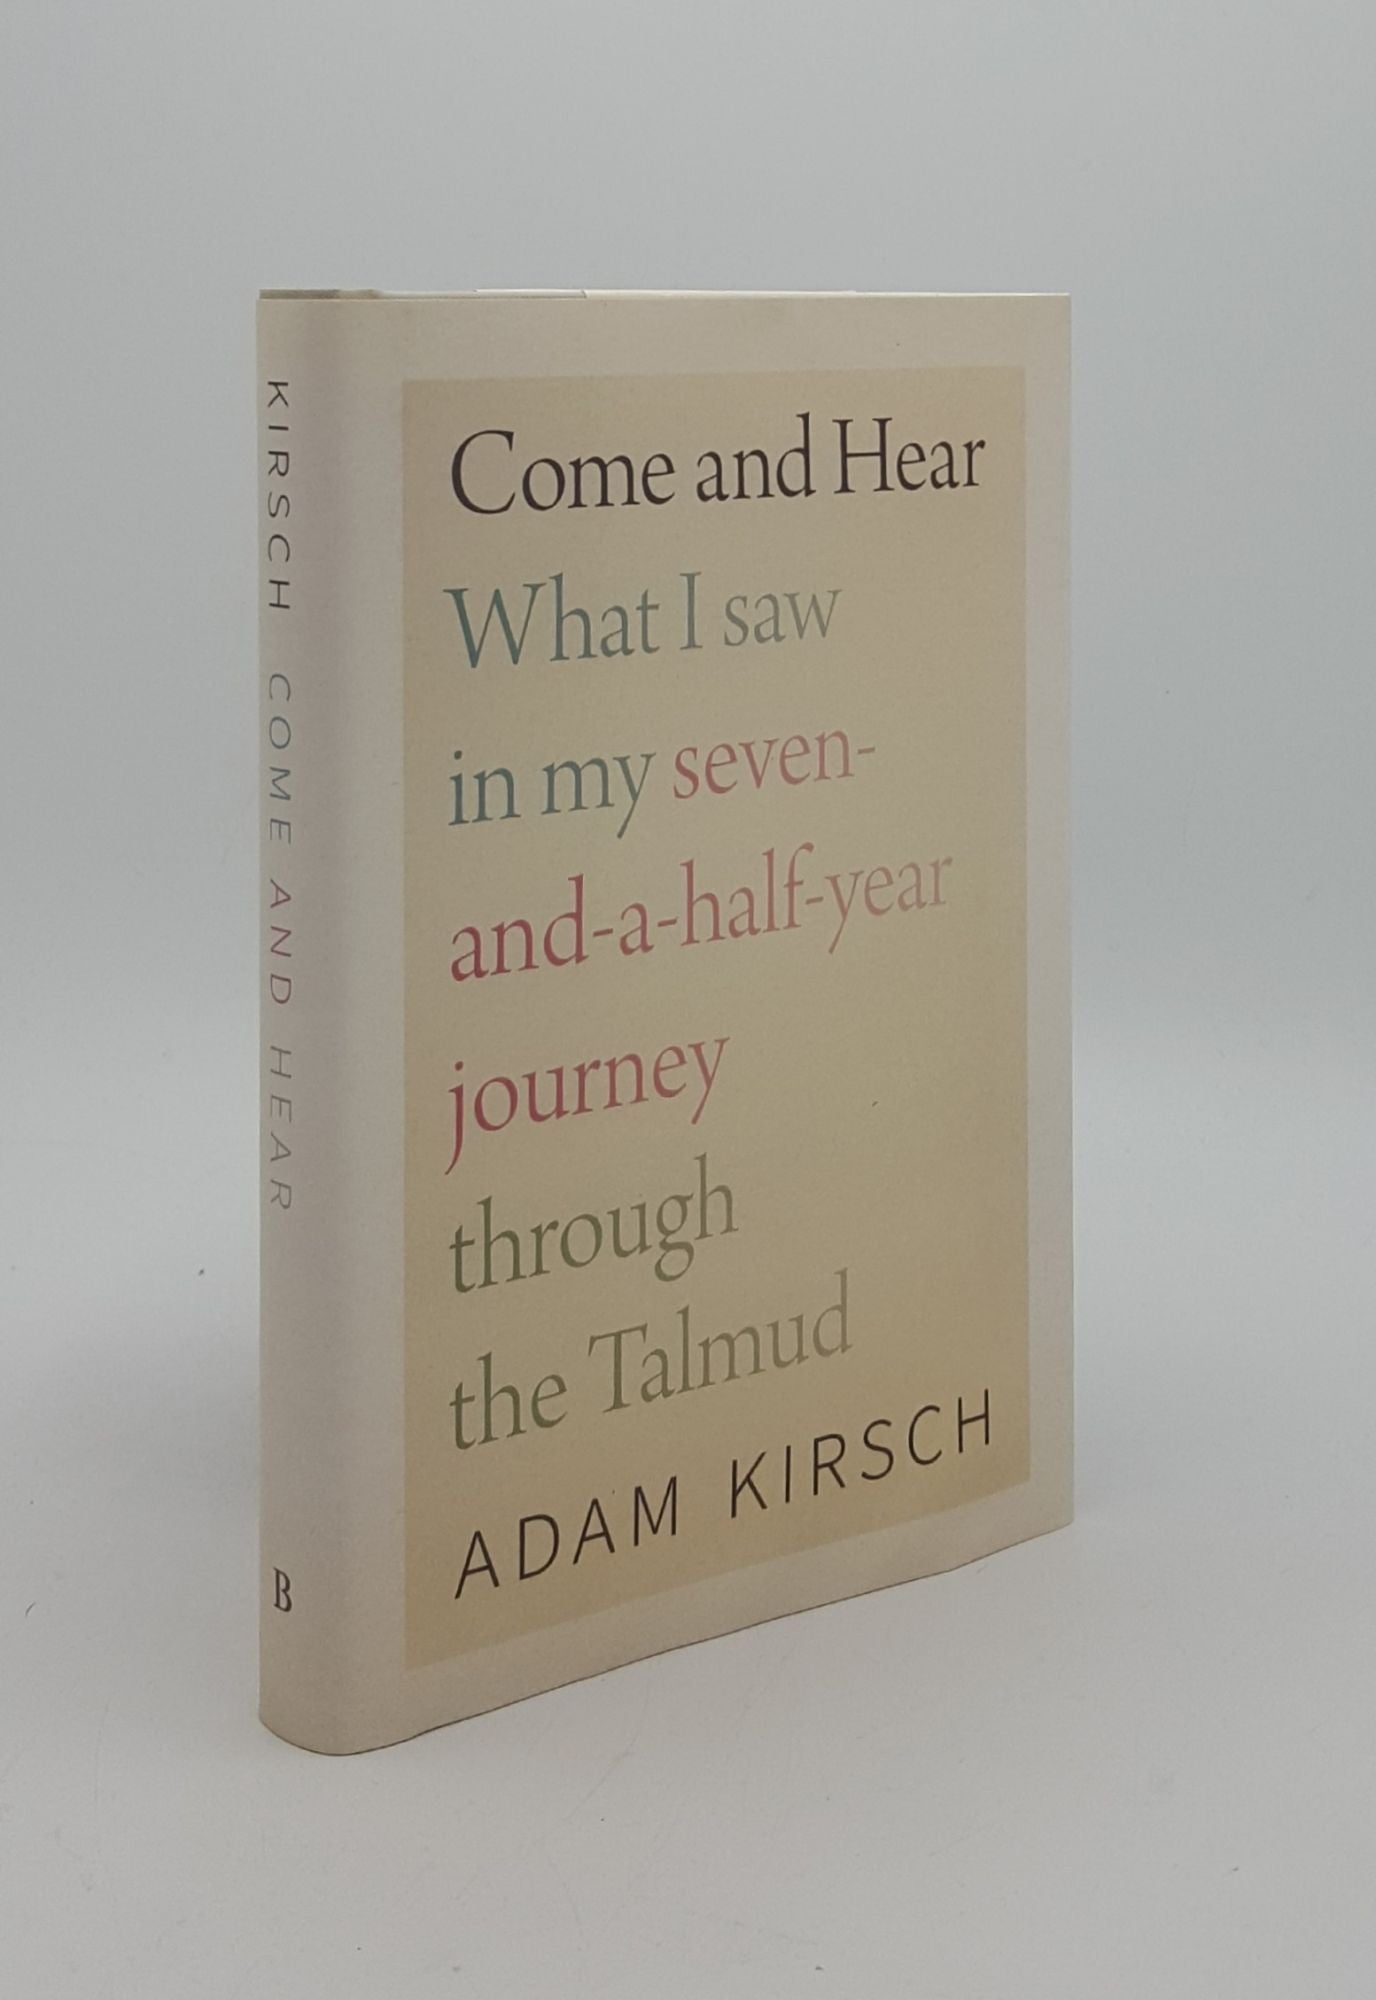 KIRSCH Adam - Come and Hear What I Saw in My Seven-and-a-Half-Year Journey Through the Talmud